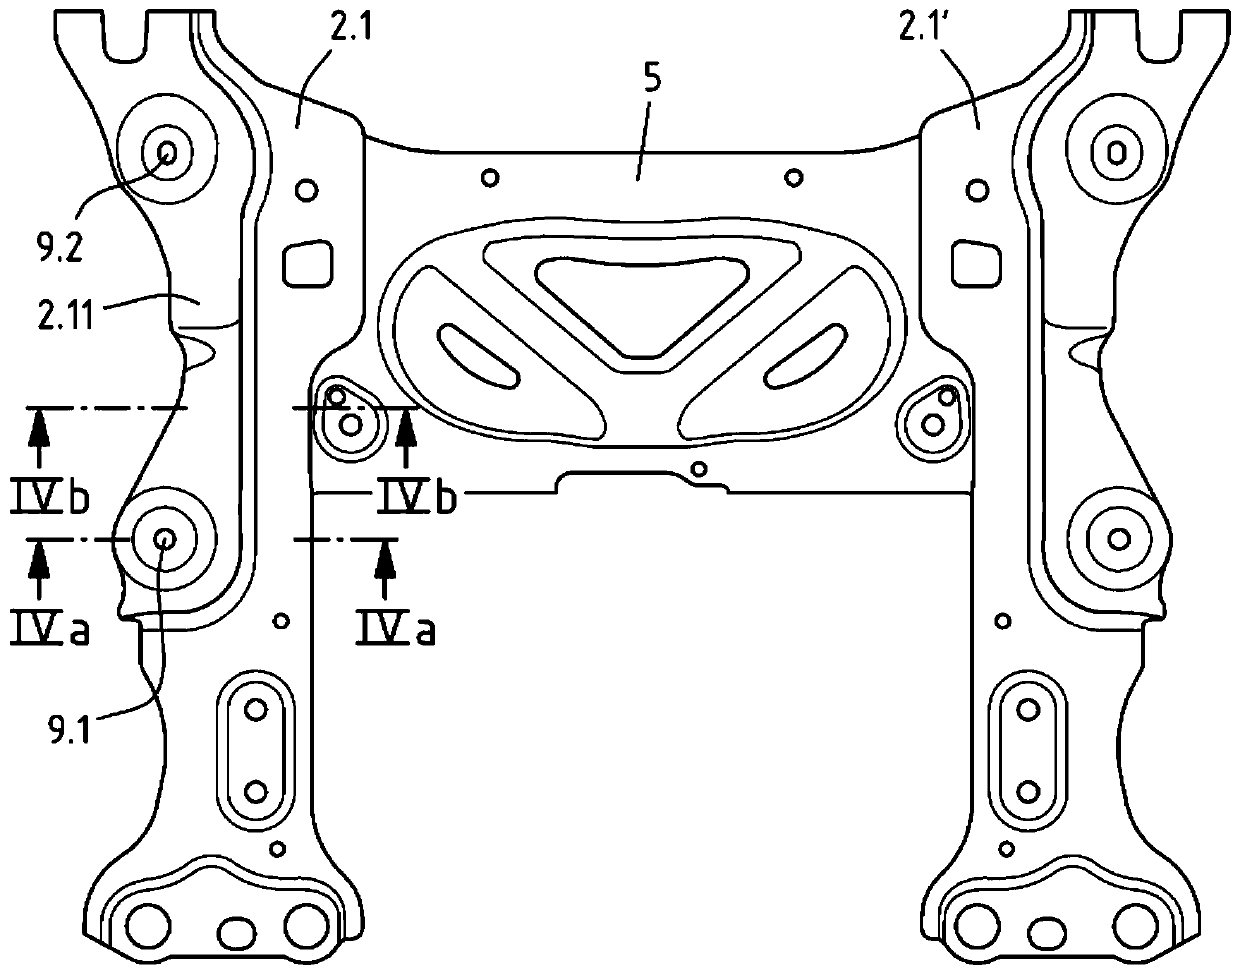 Auxiliary frame for vehicle, in particular electric vehicle